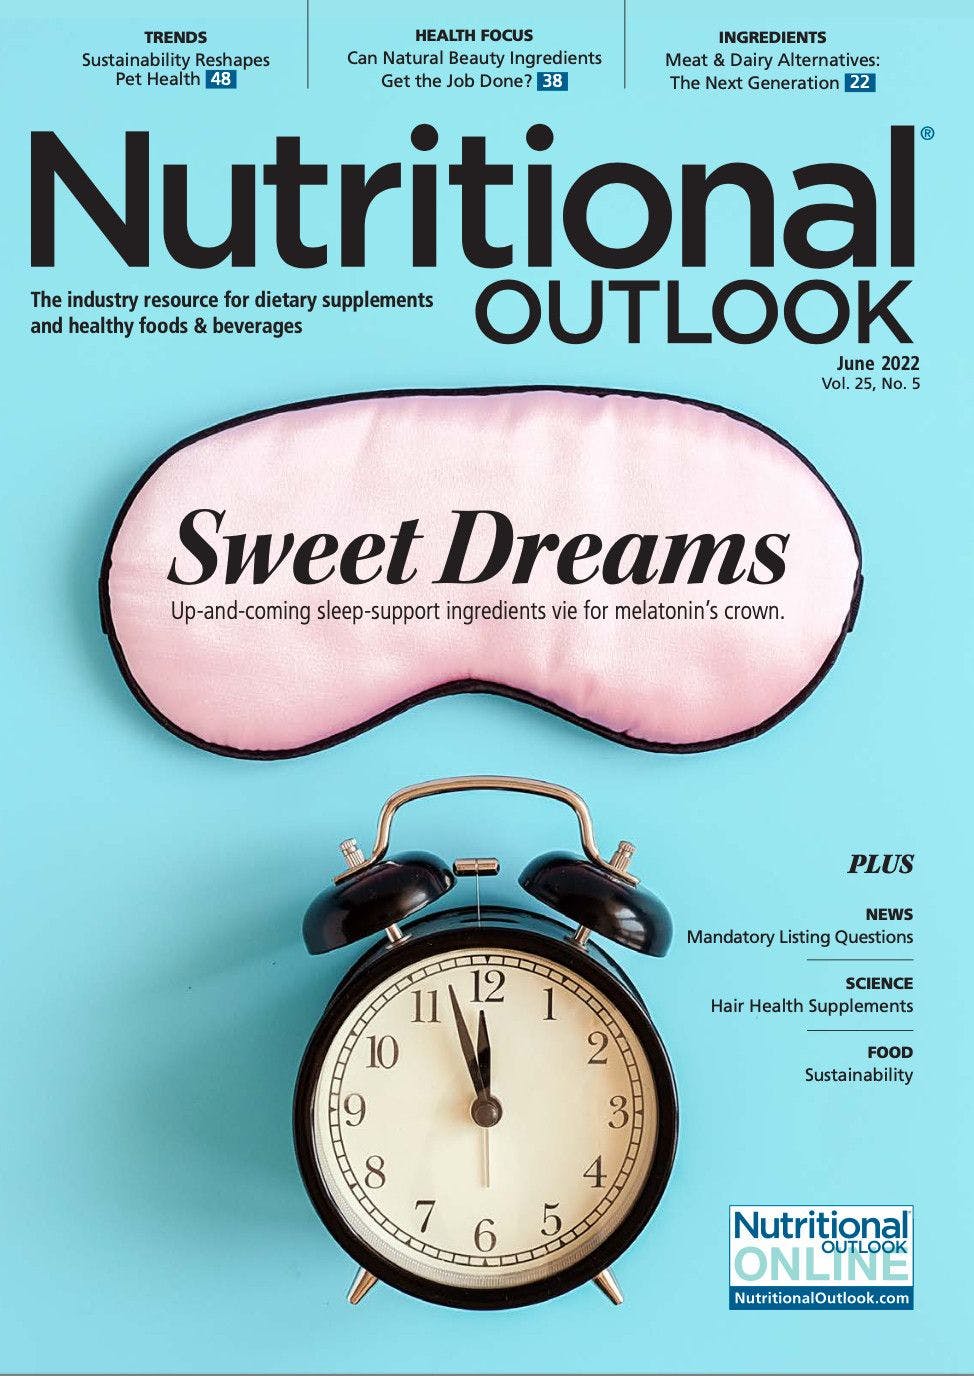 Nutritional Outlook Vol. 25 No. 5